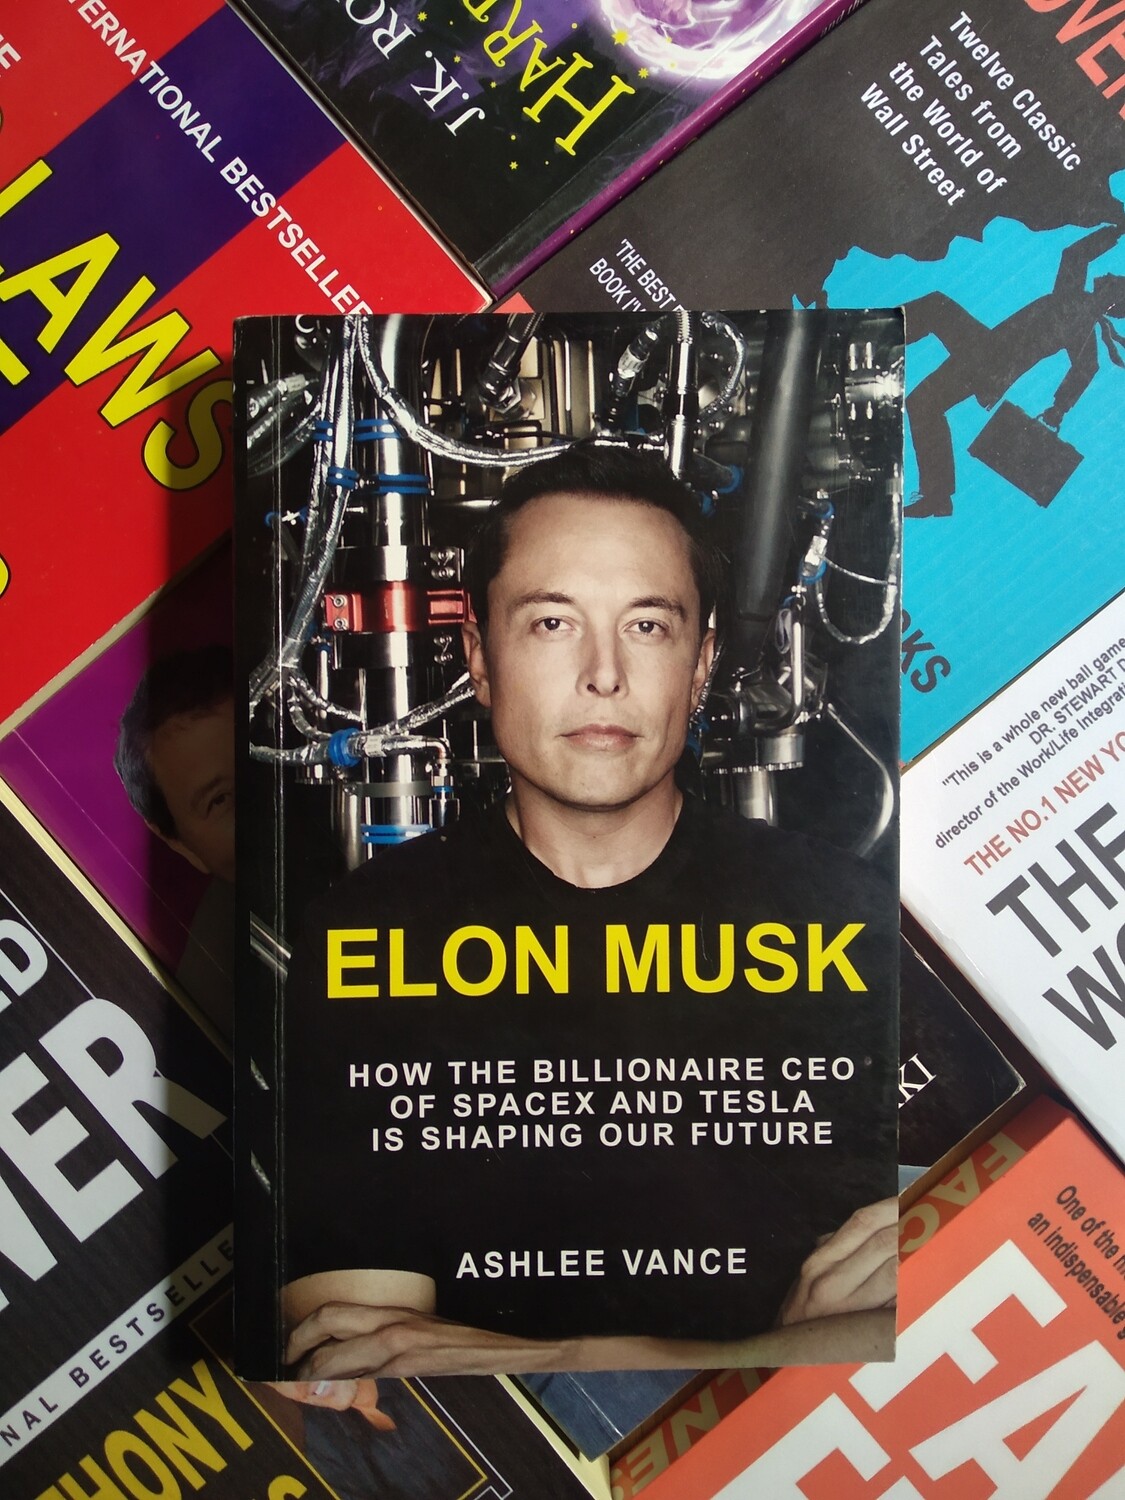 Elon Musk: Tesla, SpaceX, and the Quest for a Fantastic Future
Book by Ashlee Vance